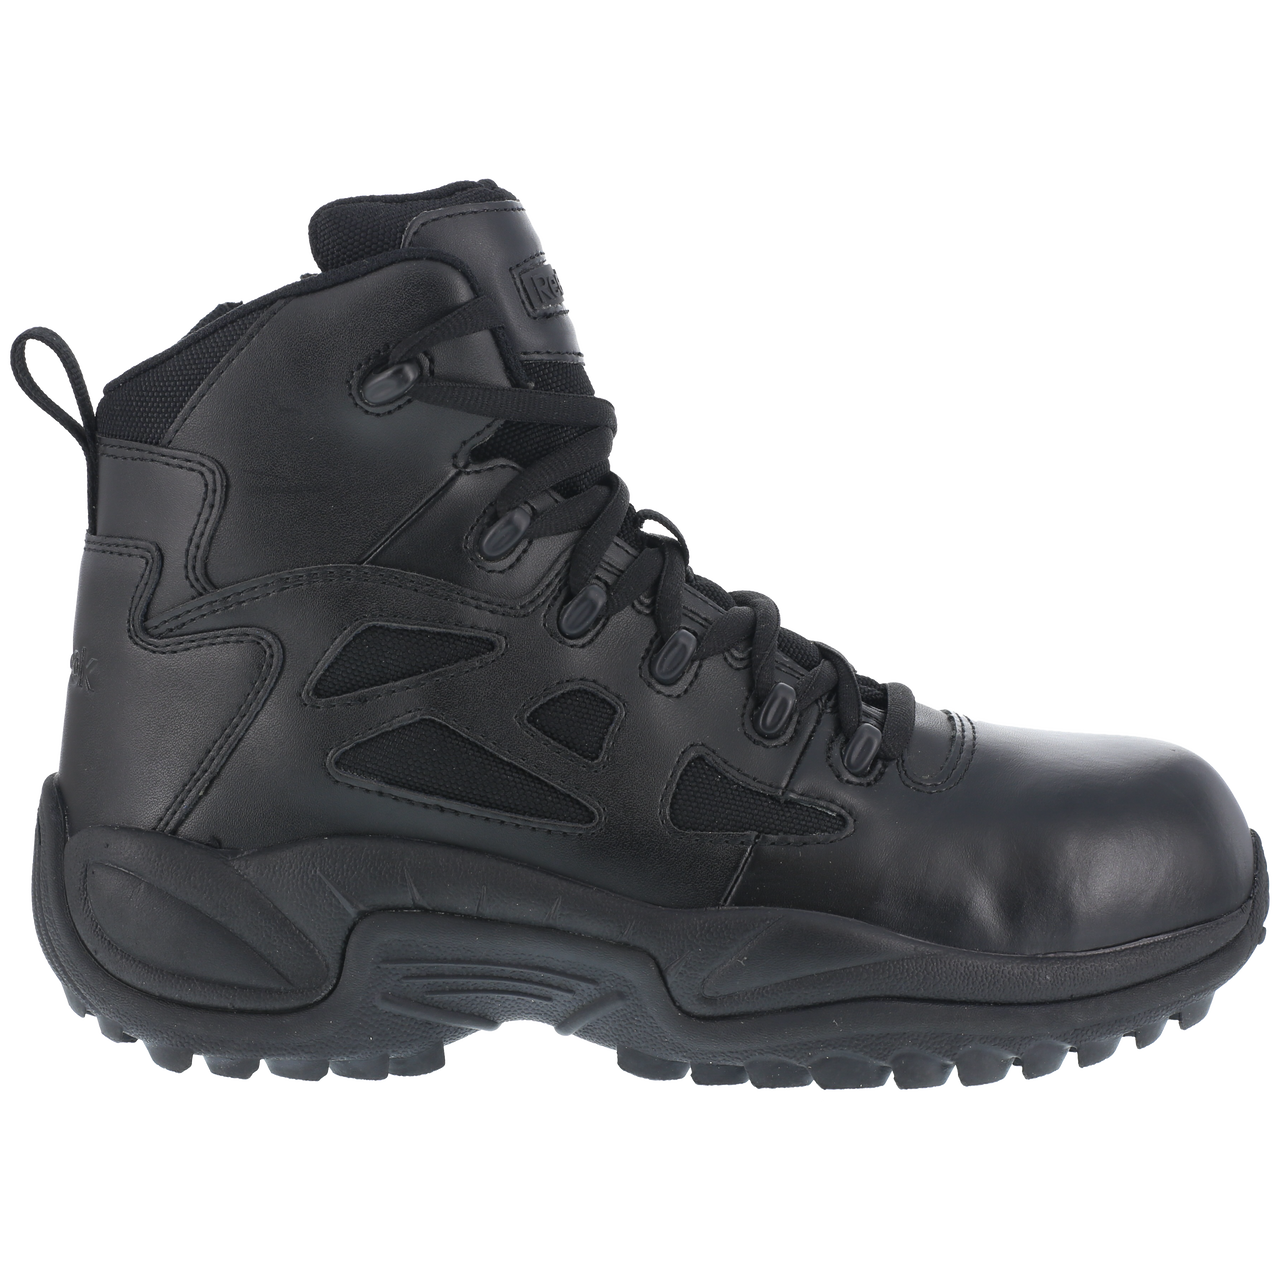 Reebok Rapid Response 6" Stealth Boots with Side Zipper - RB8674